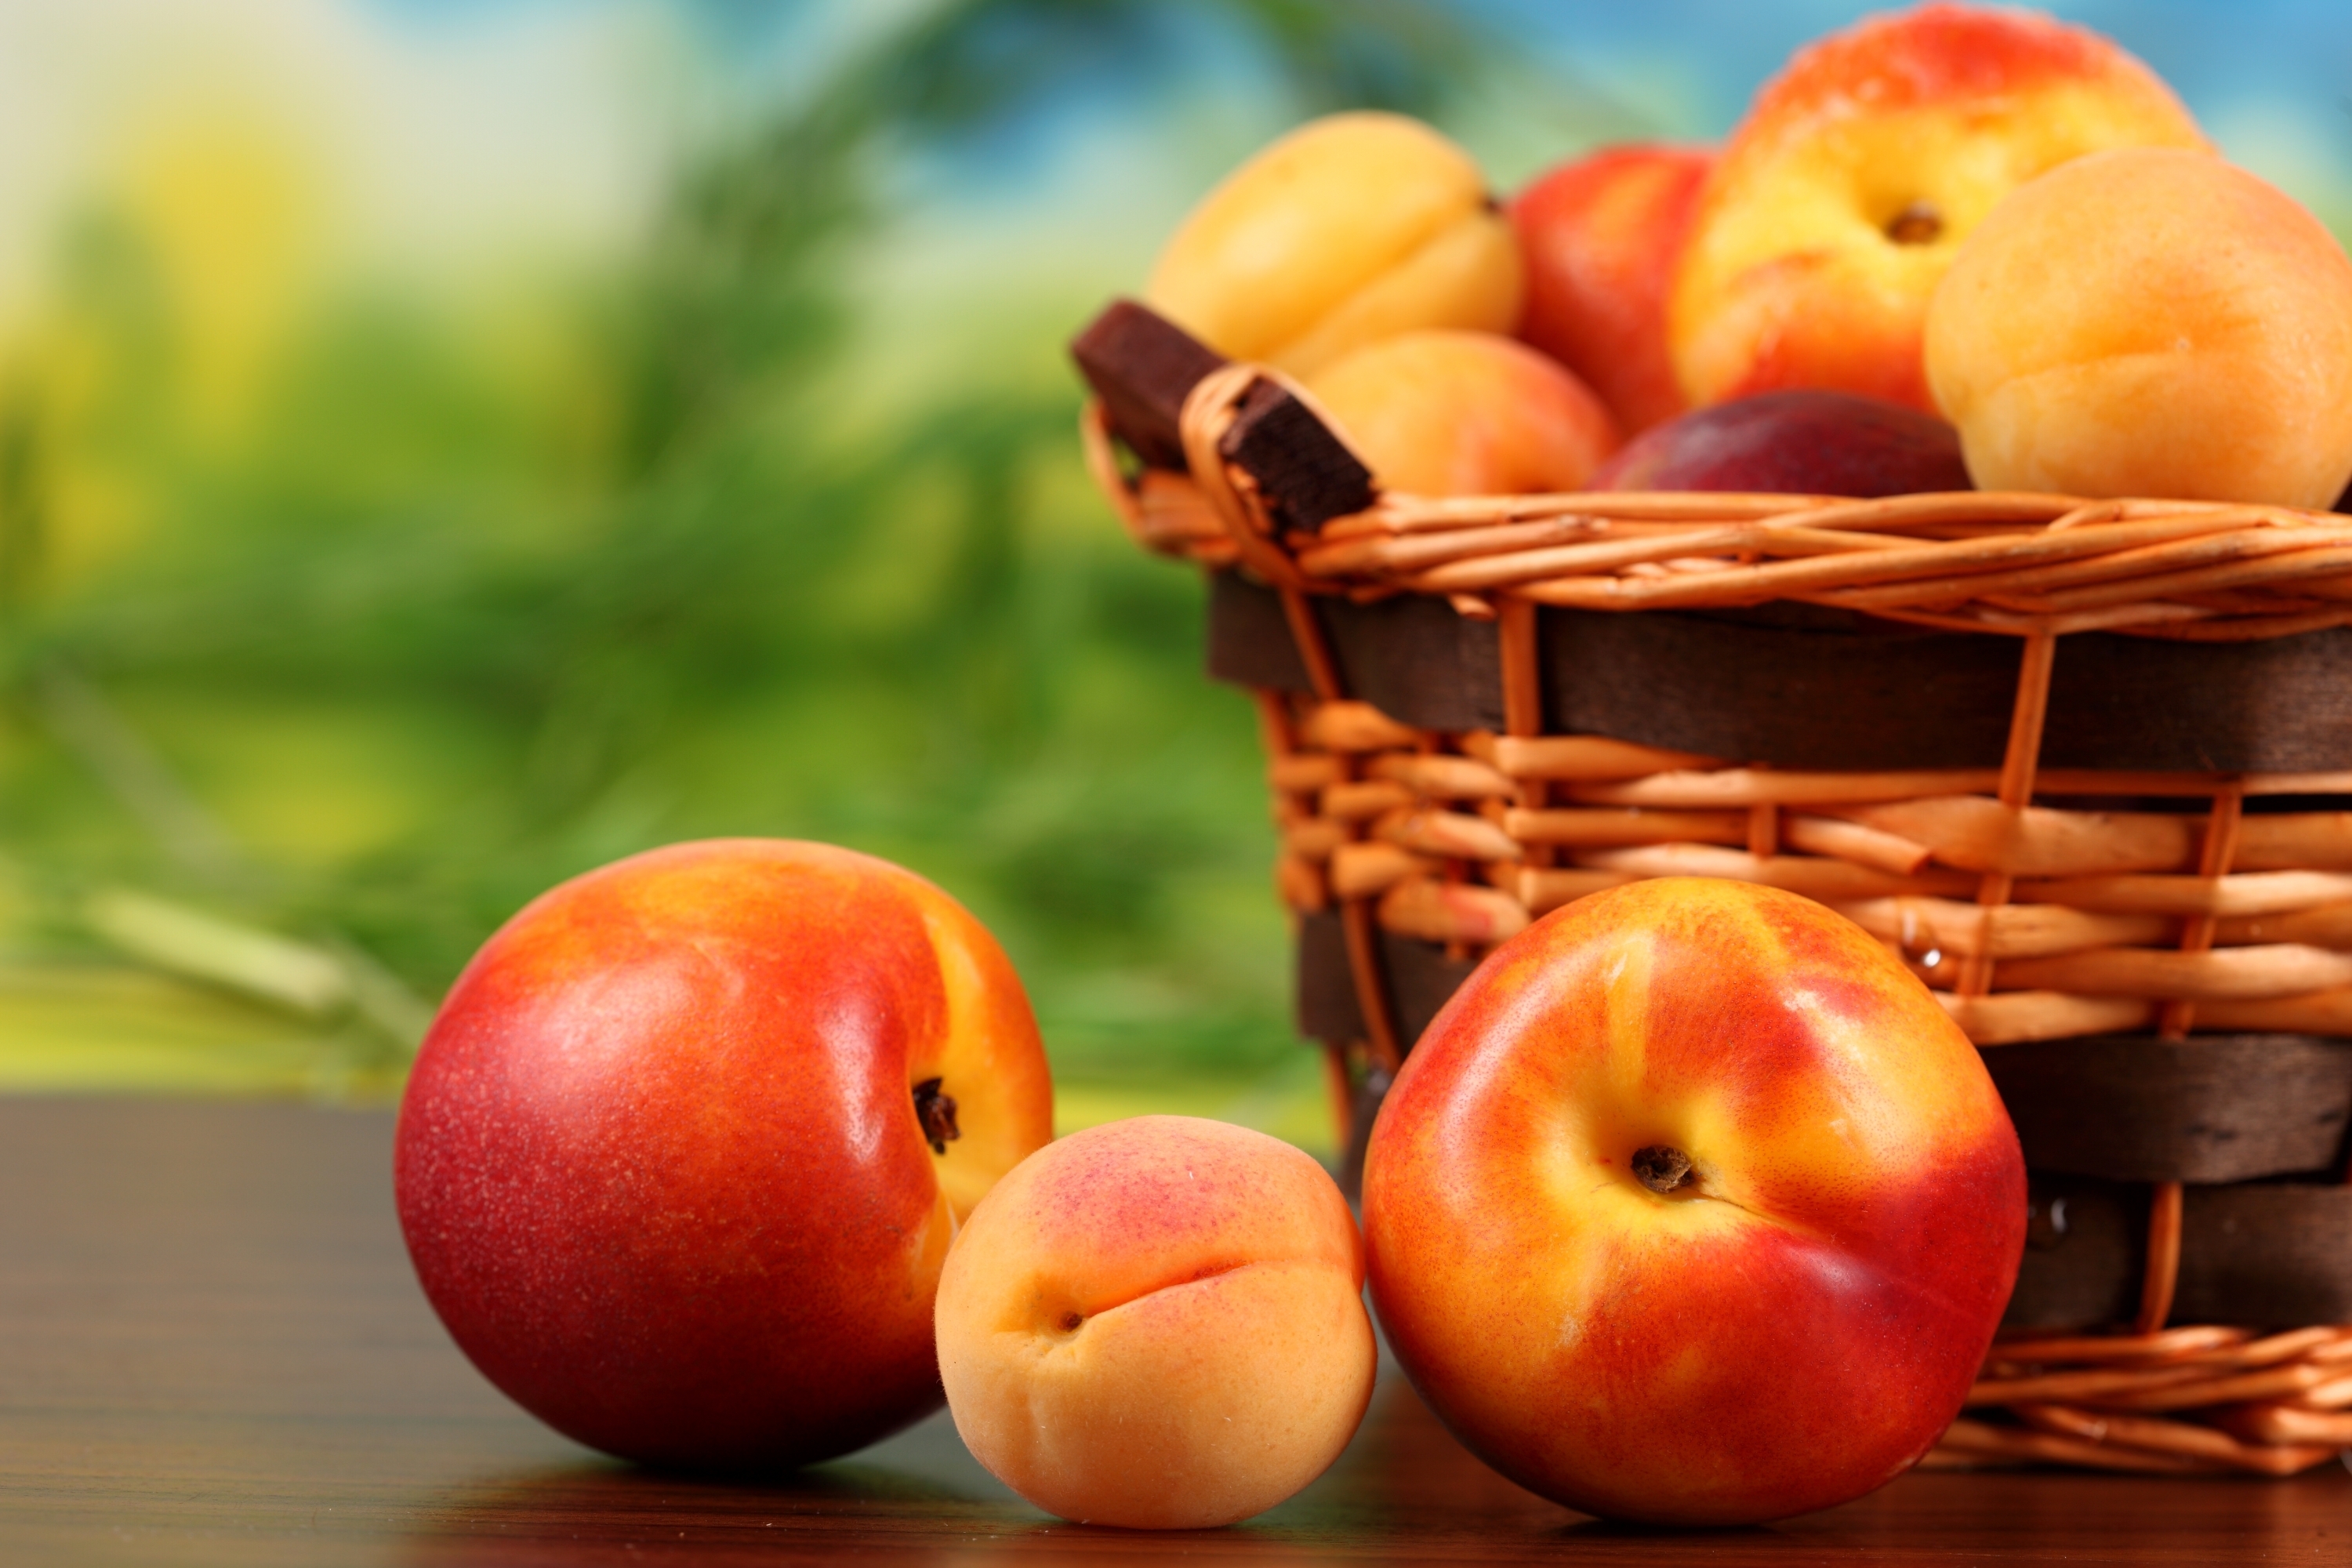 111845 download wallpaper fruits, food, peaches, basket, apricots, nectarine screensavers and pictures for free